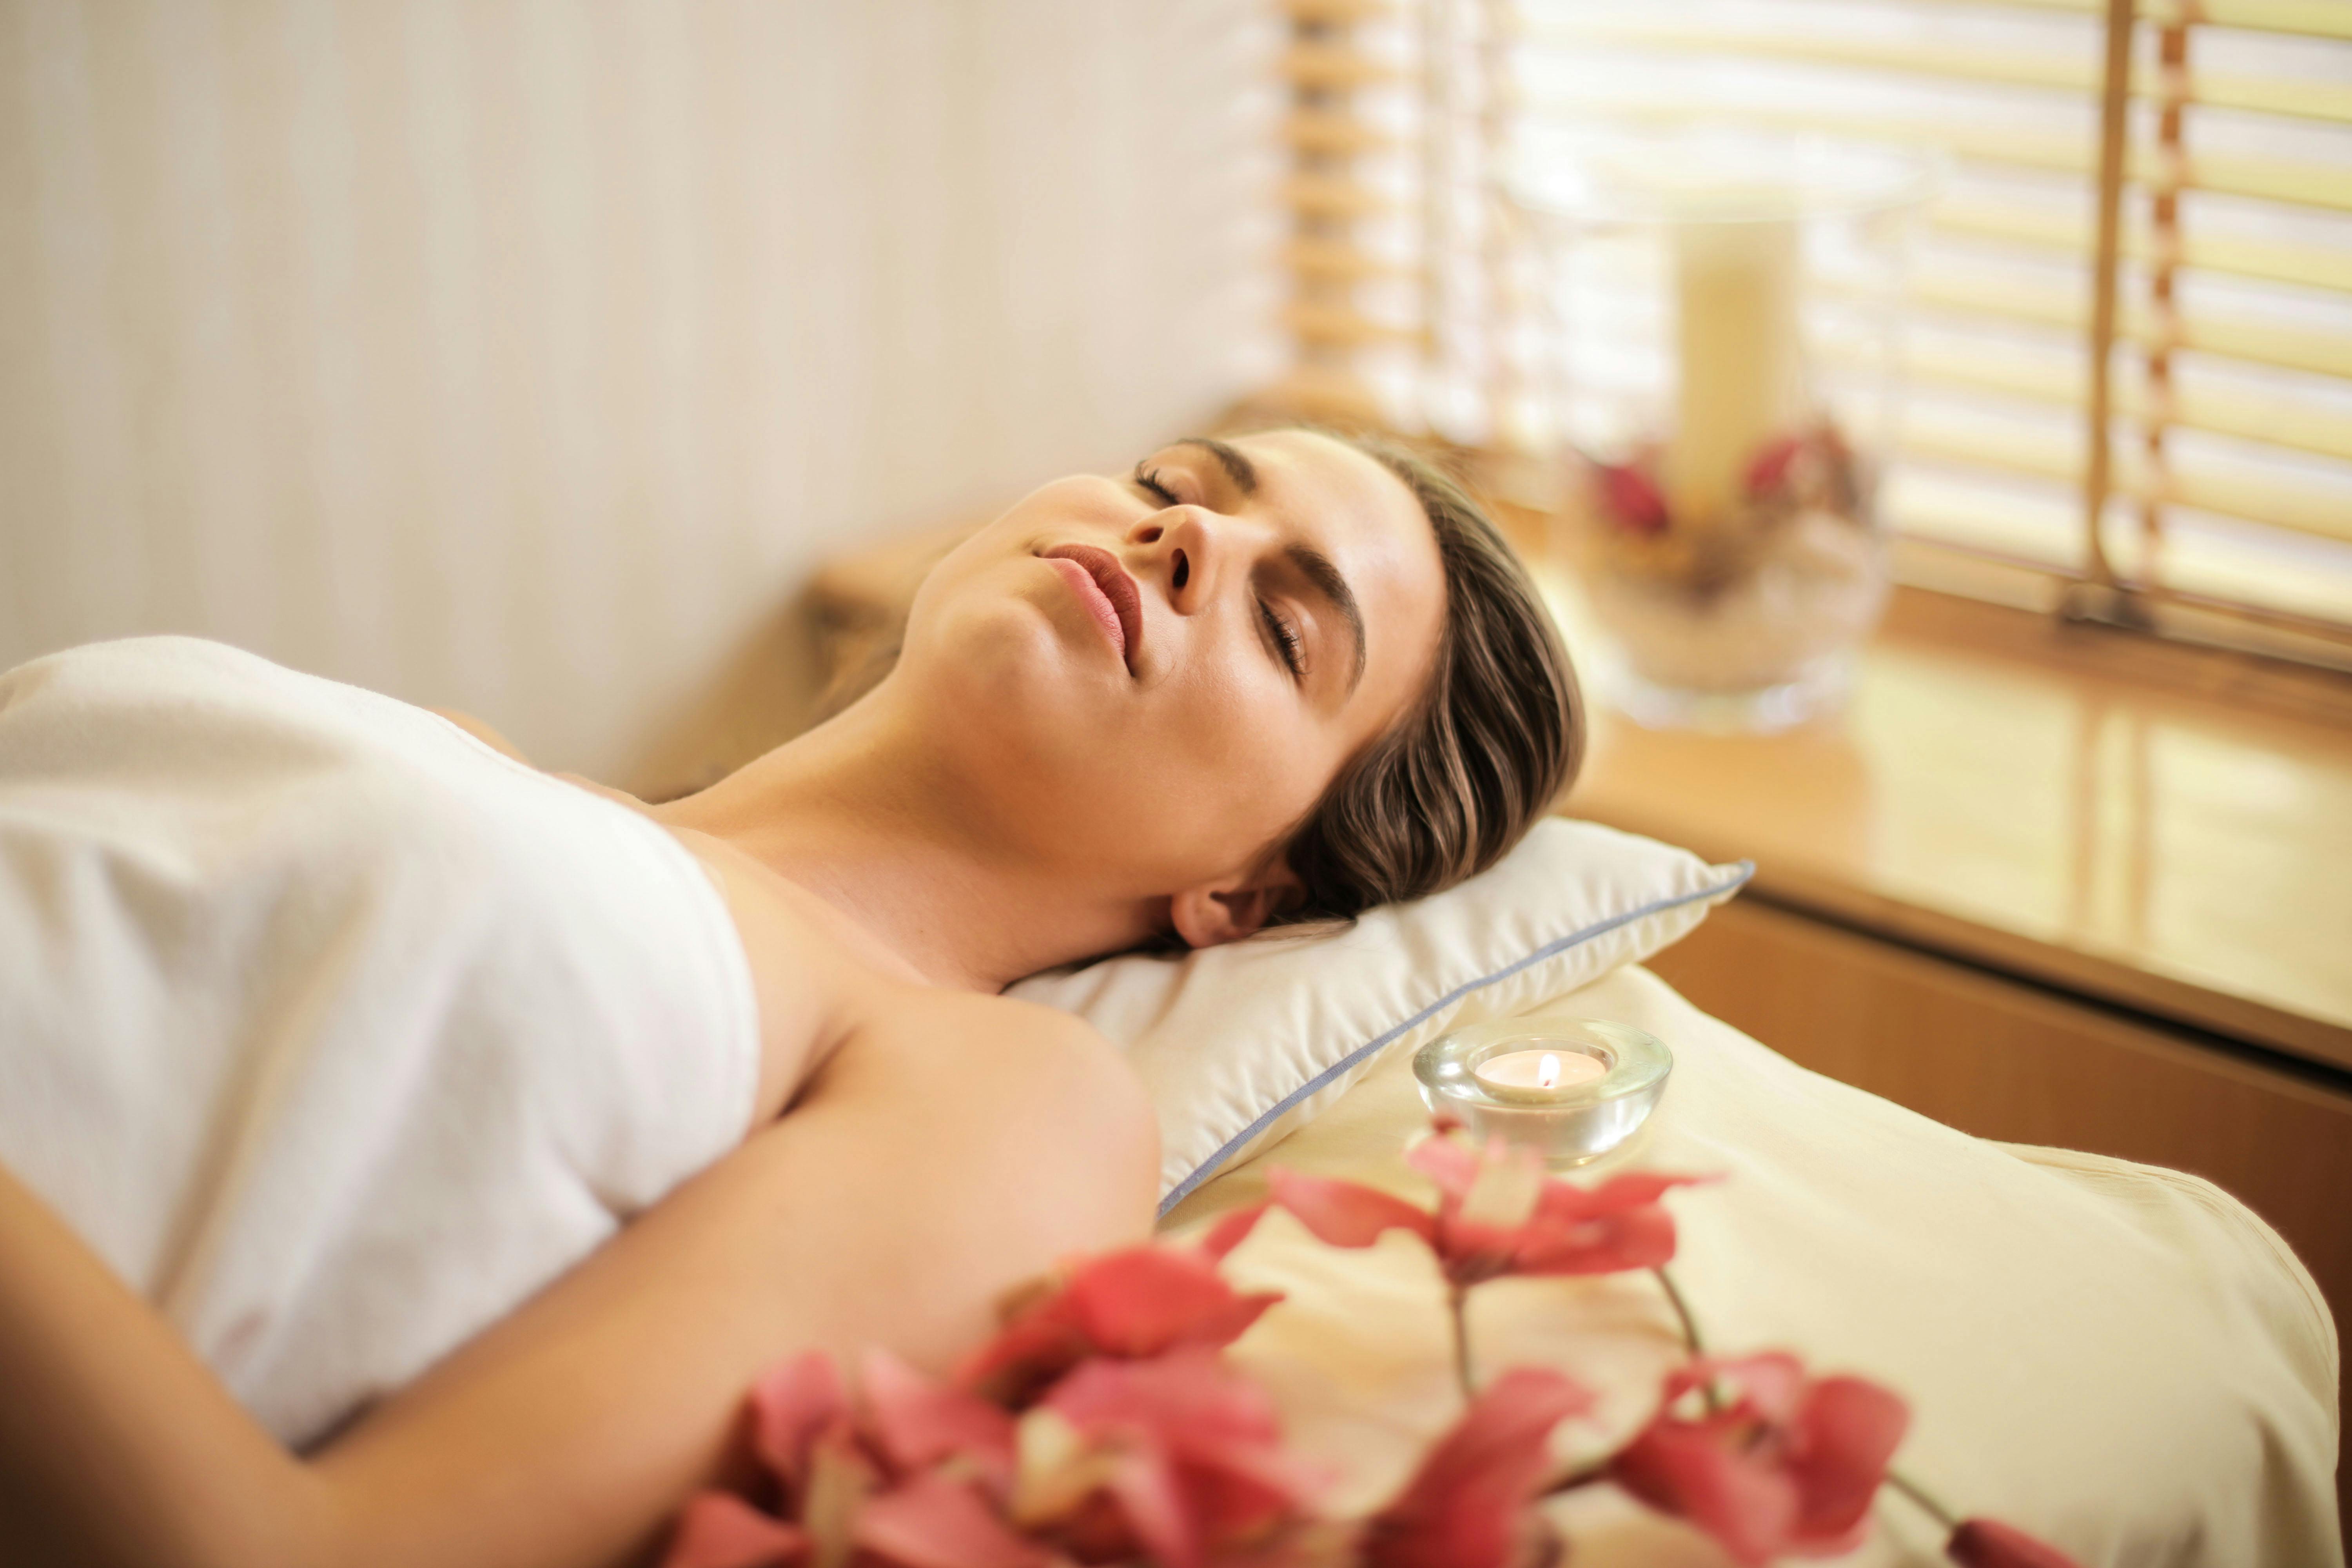 A woman with her eyes closed while enjoying a spa treatment | Source: Pexels